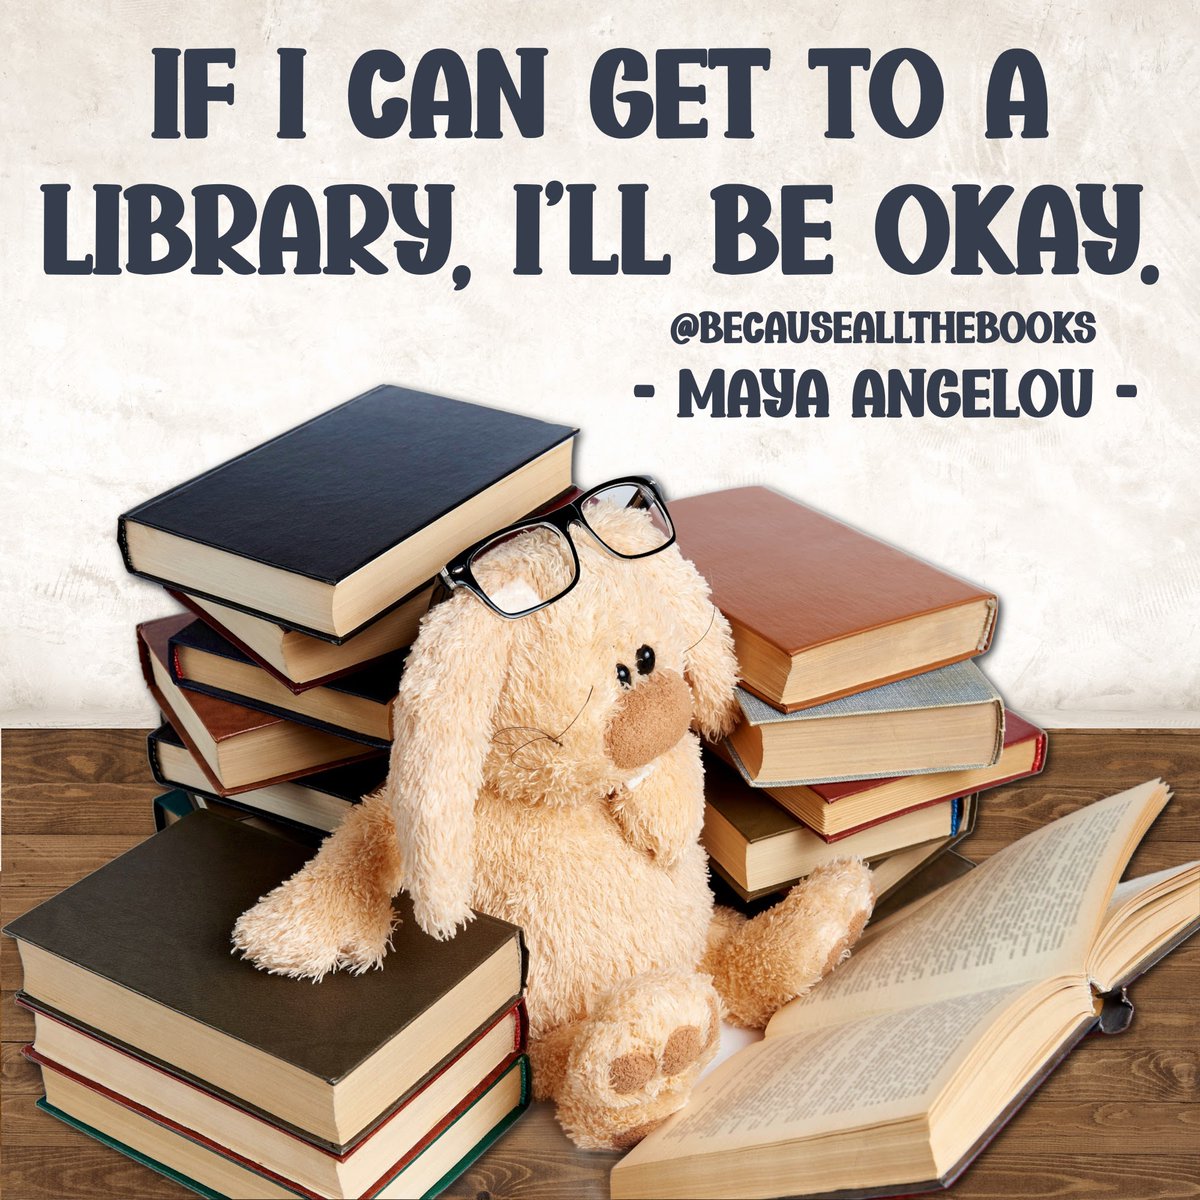 Maya Angelou understood the importance of the refuge libraries provide.

#BecauseAllTheBooks #LibrariesAreForEveryone #LibraryLove #LibrariesTransform